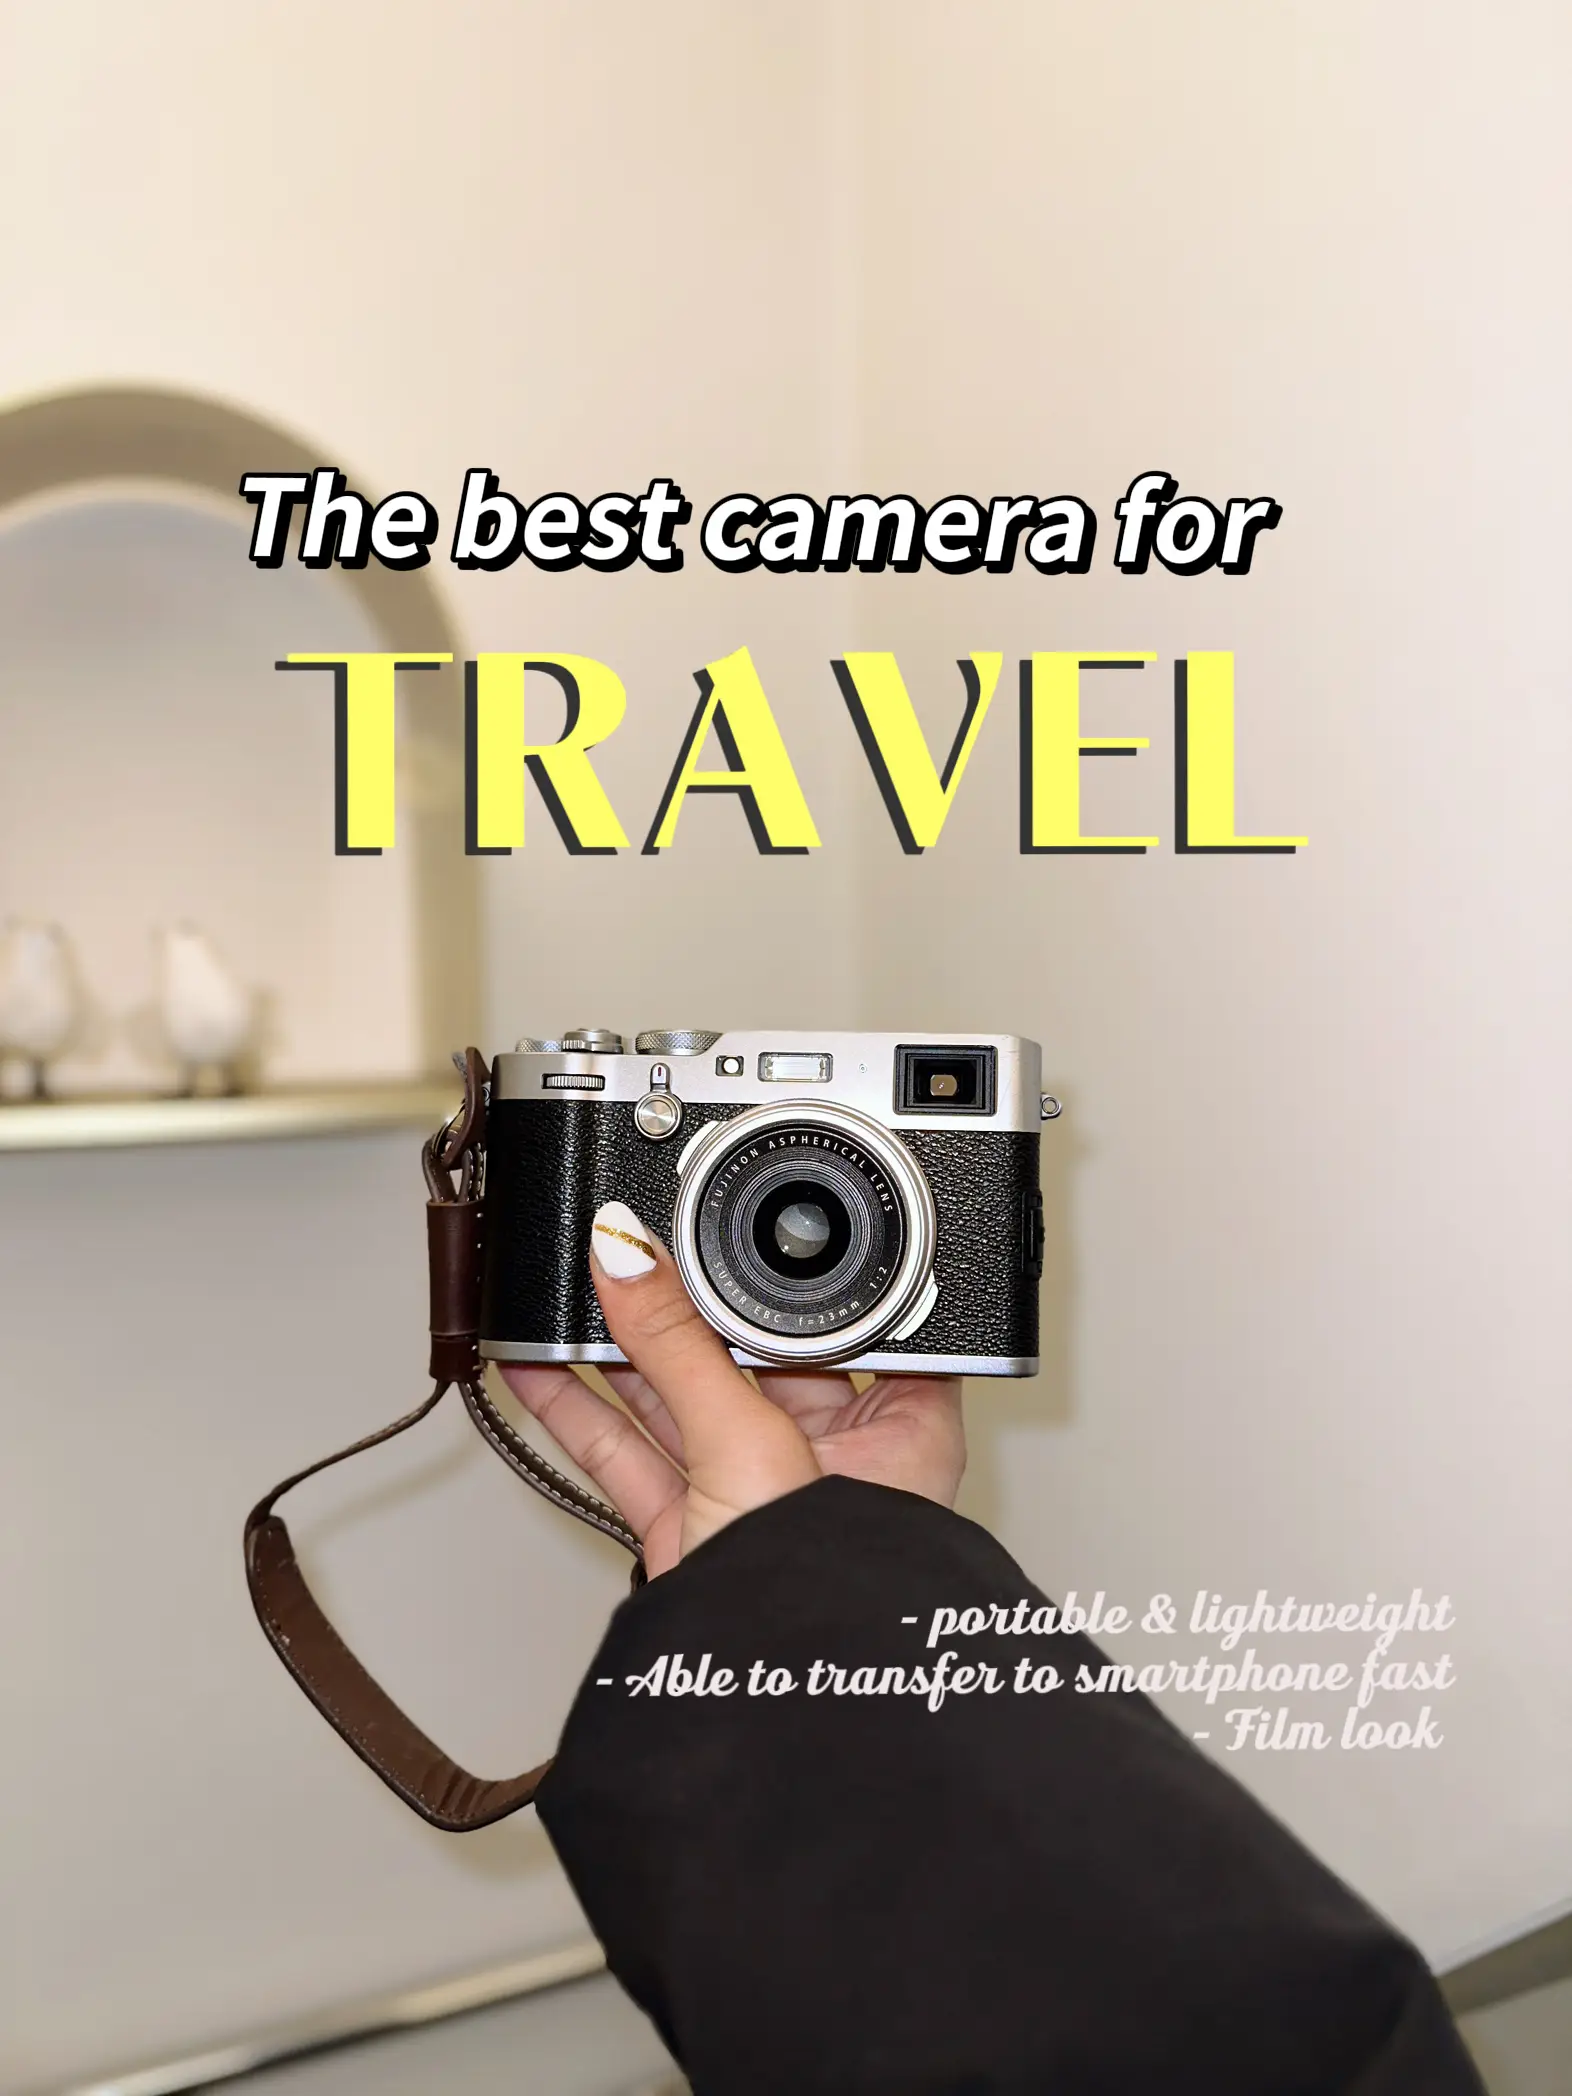 The best camera for TRAVEL!! ✈️🧳's images(0)